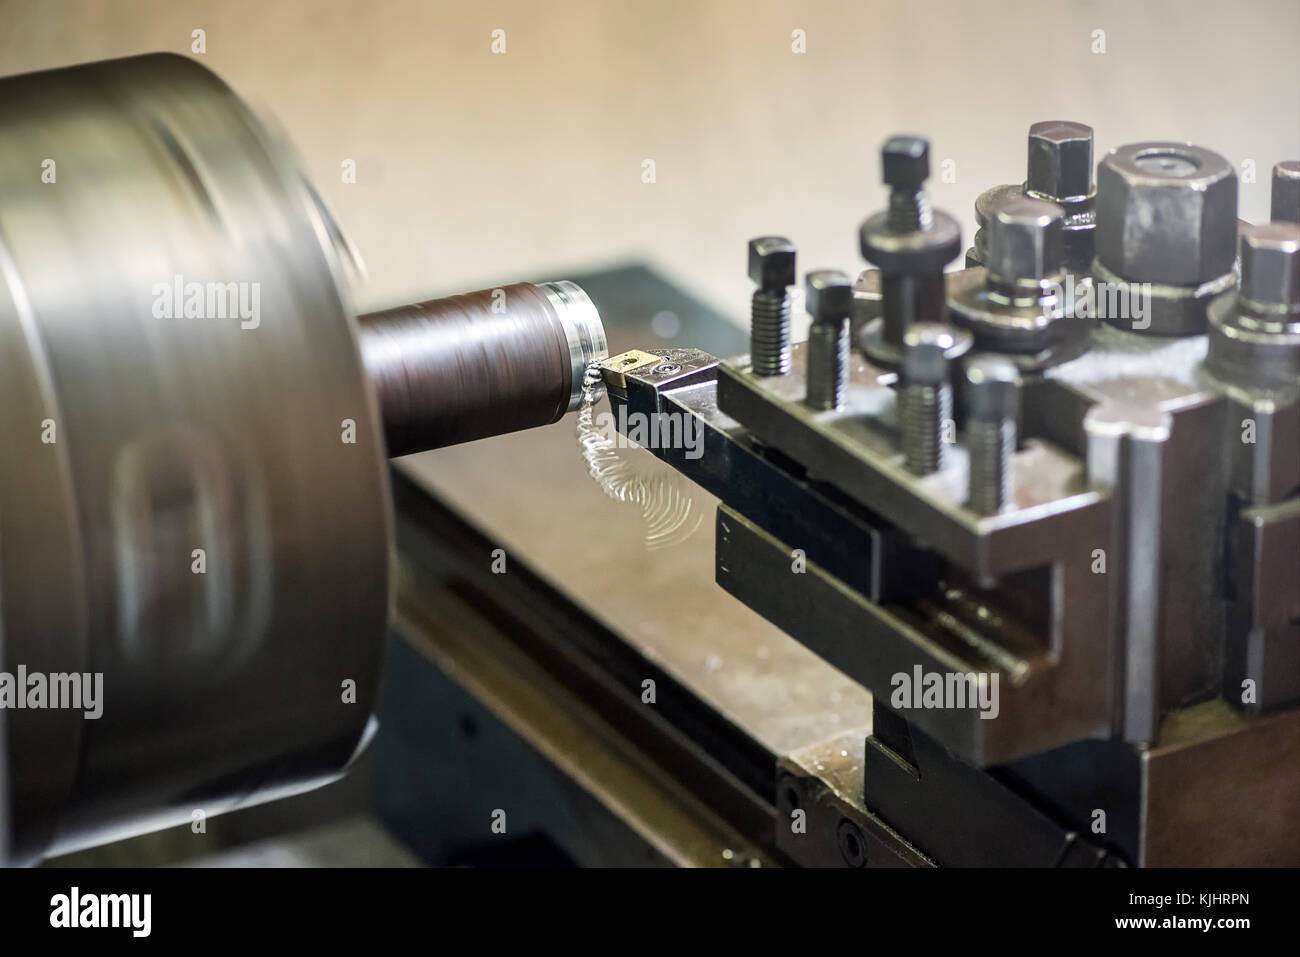 Lathe machine in an industrial workshop with tools and dies and a component in the chuck being milled Stock Photo